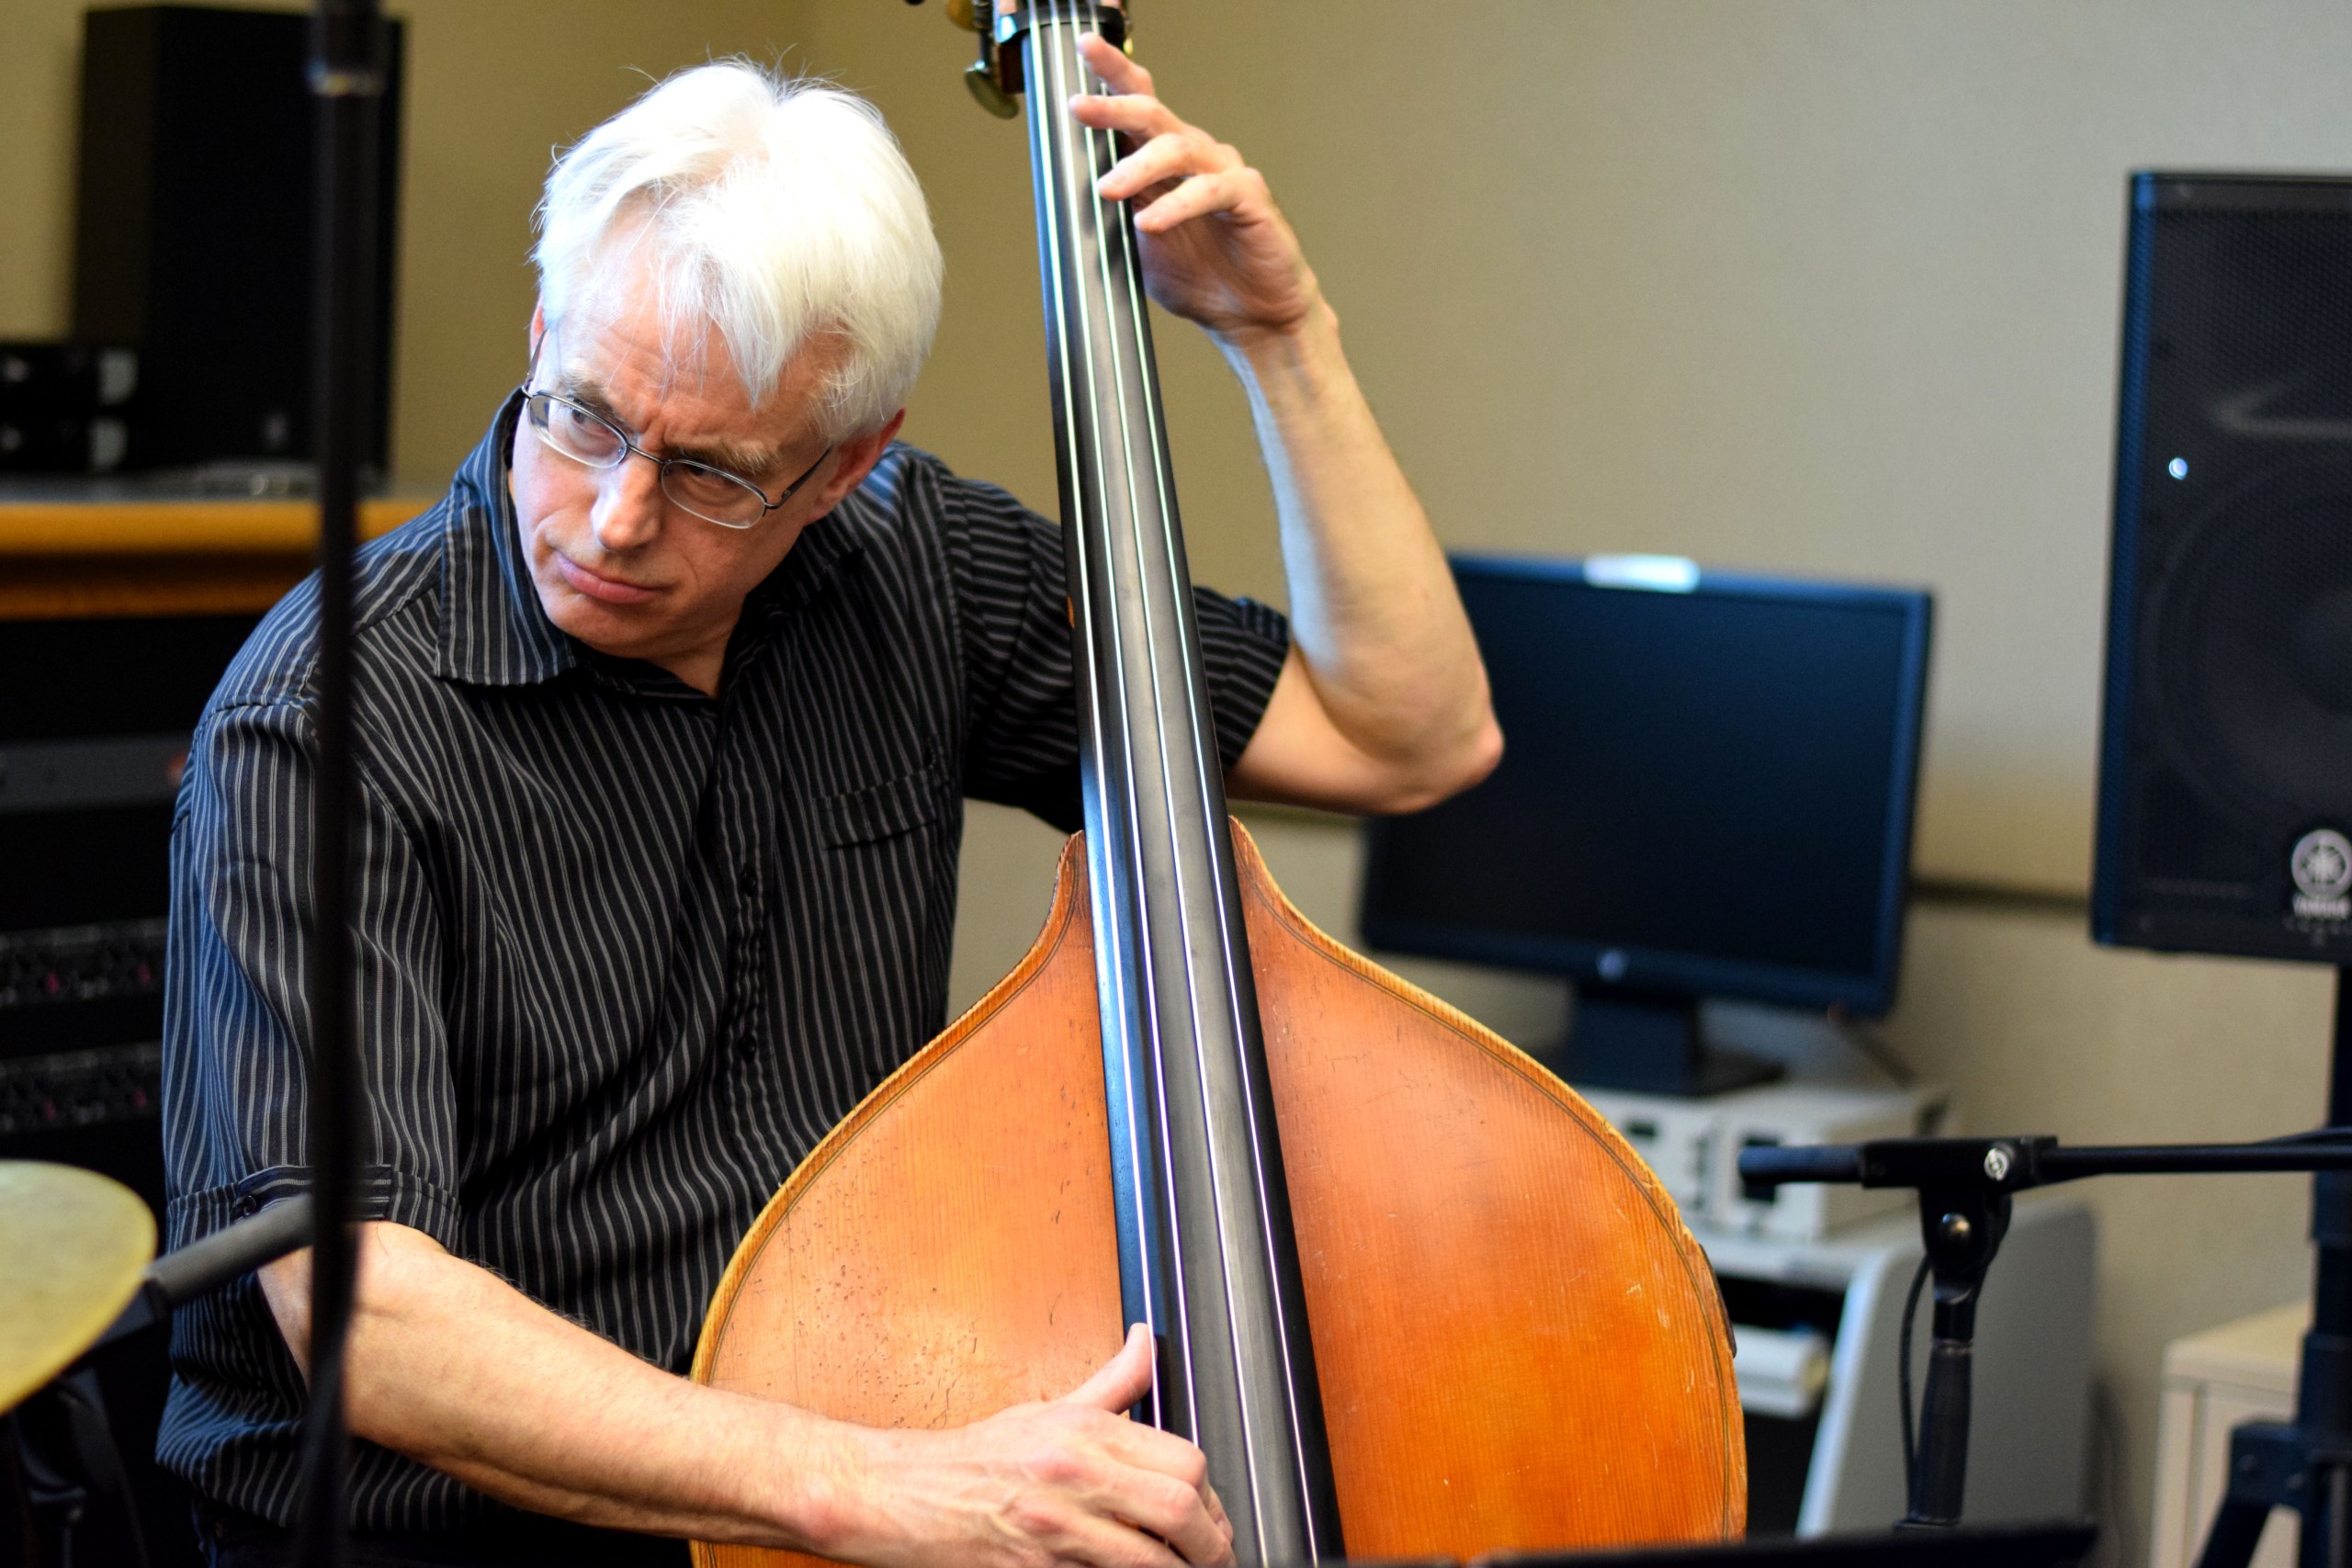 Sound Jazz Trio KPLU - Clipper Anderson playing the bass